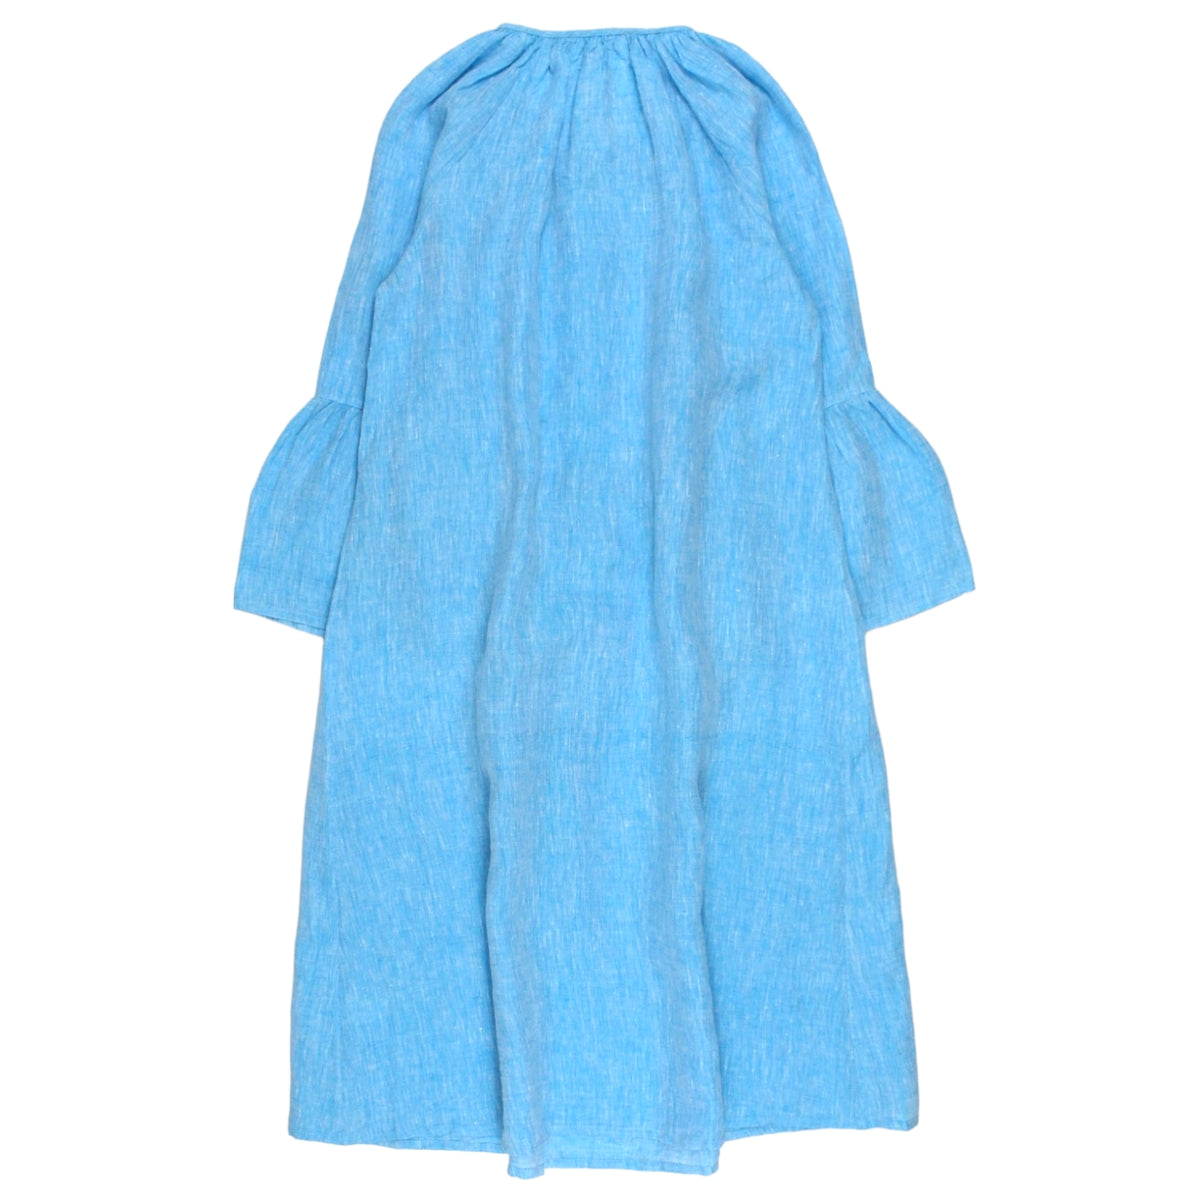 NRBY Turquoise Chambray Linen Dress - Sample